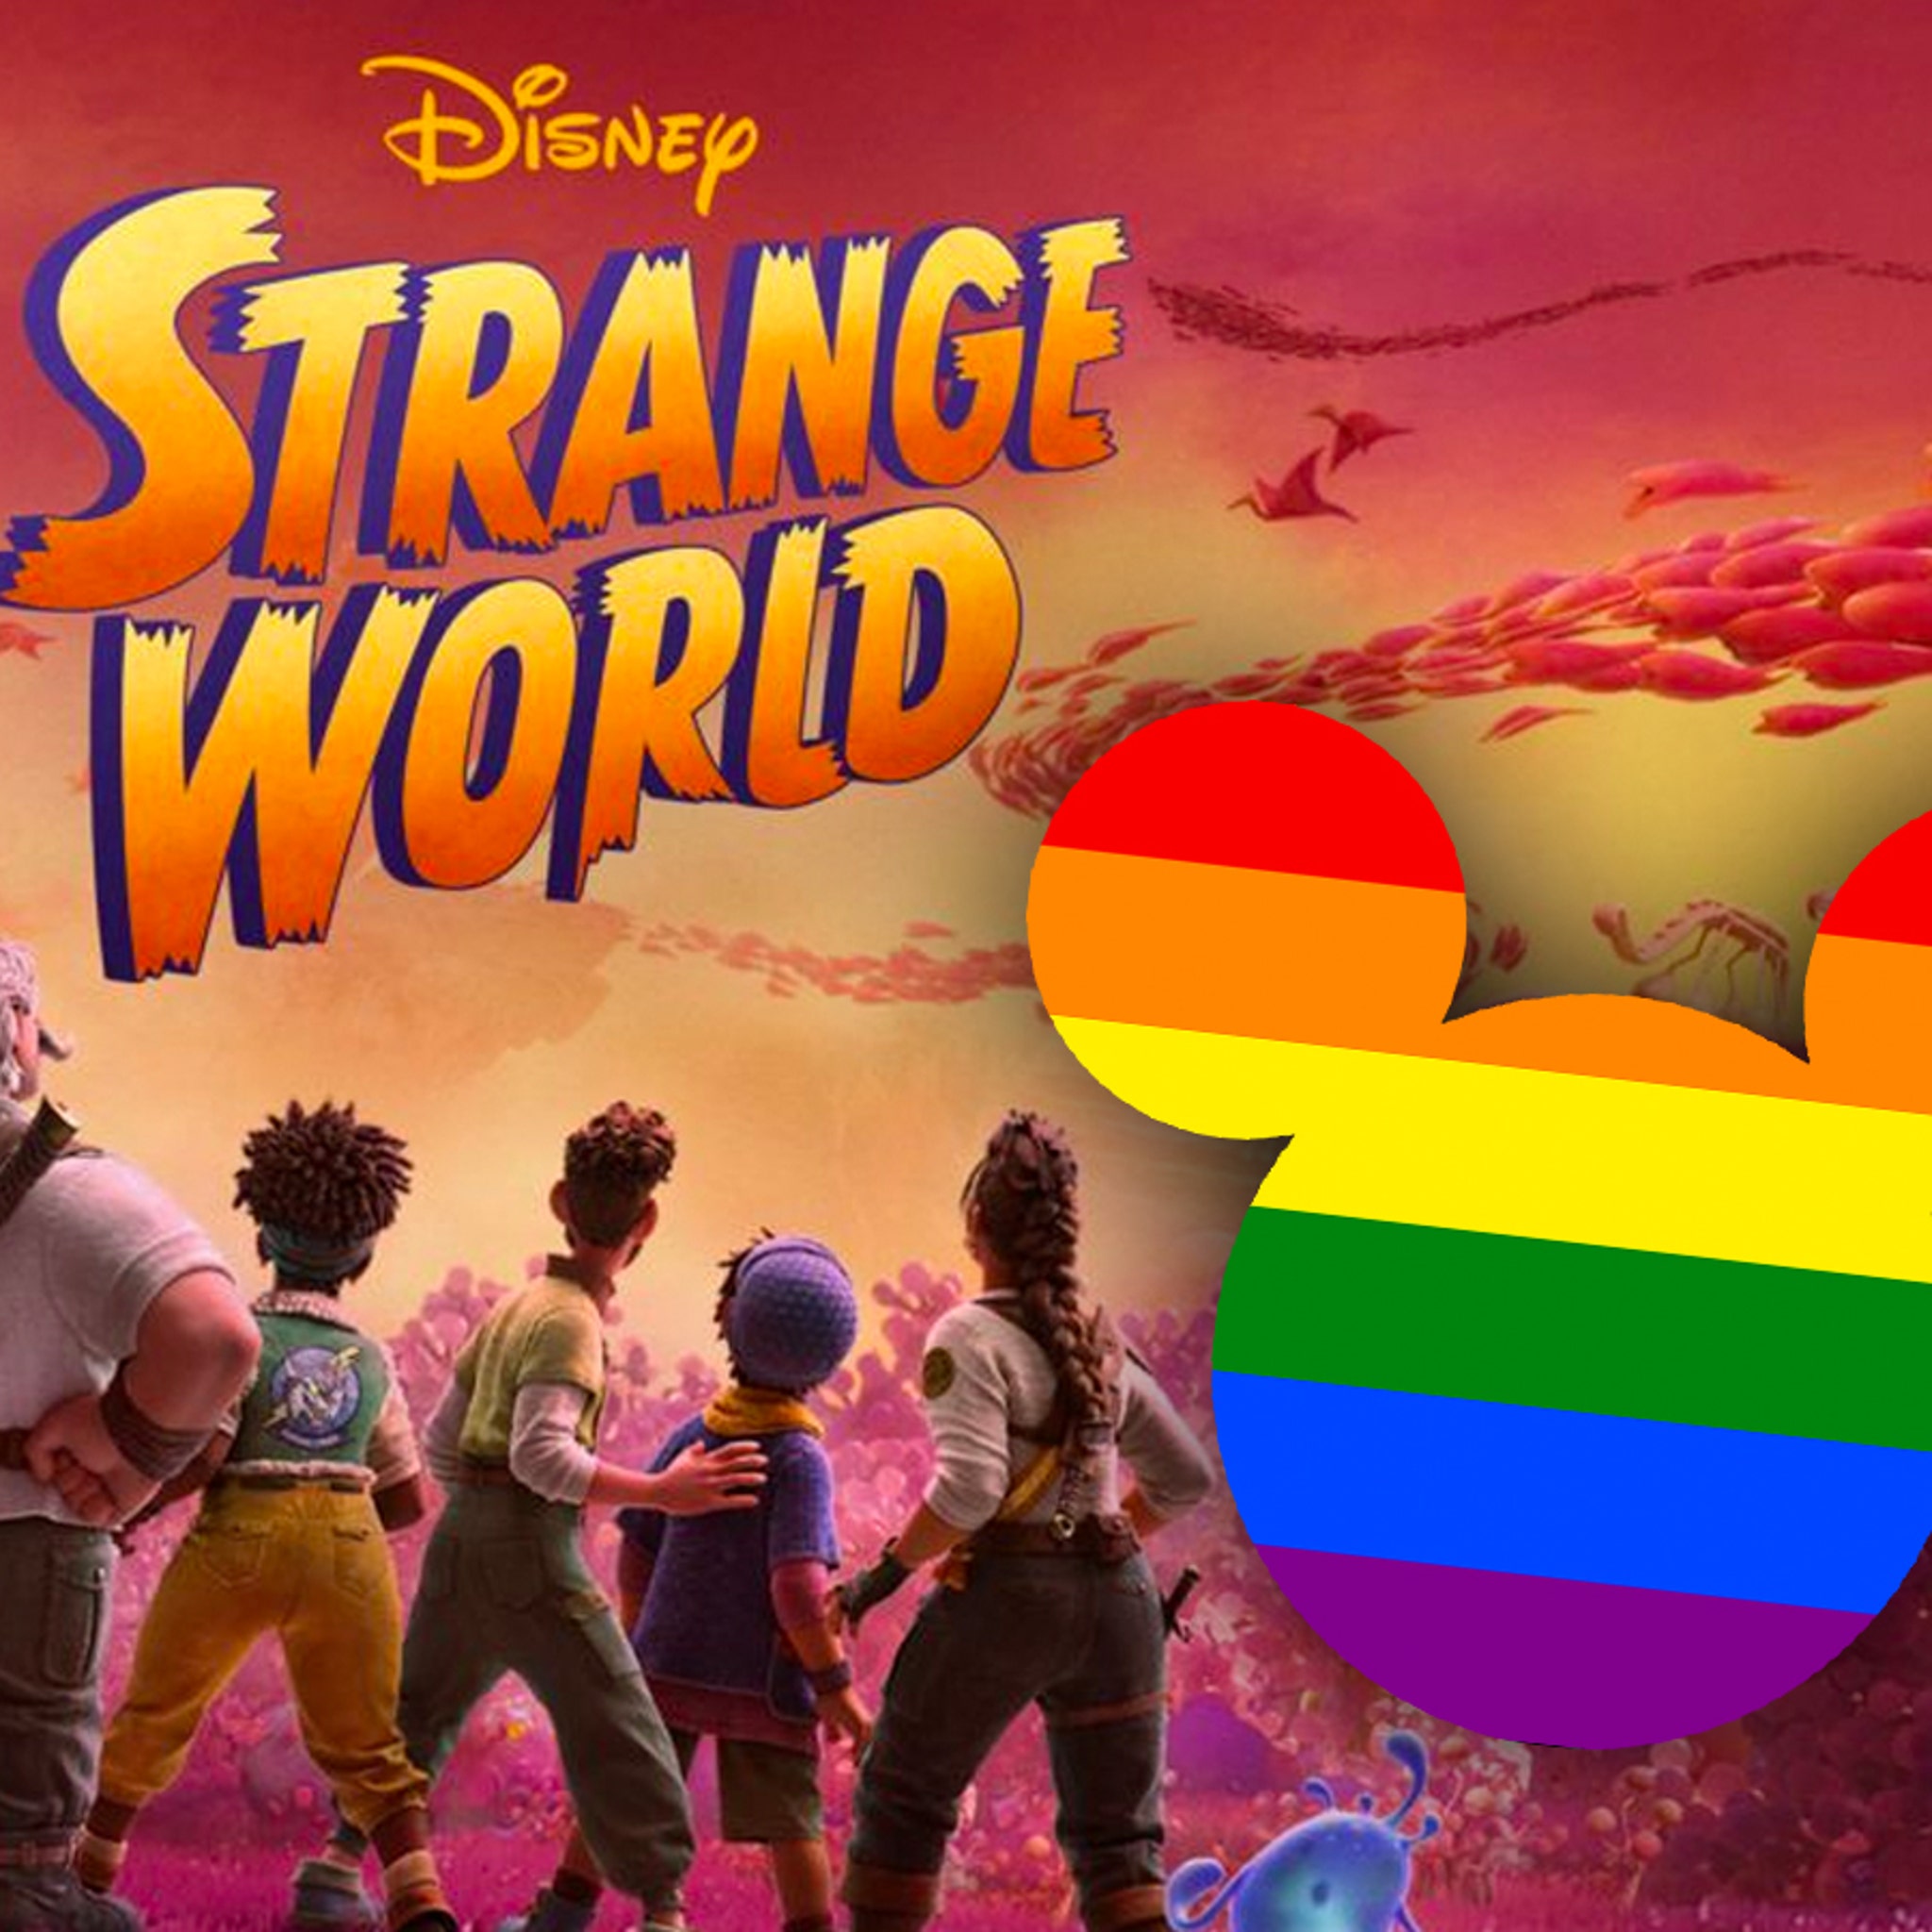 Disney's 'Strange World' Flops, LGBTQ Character to Be Scapegoated?